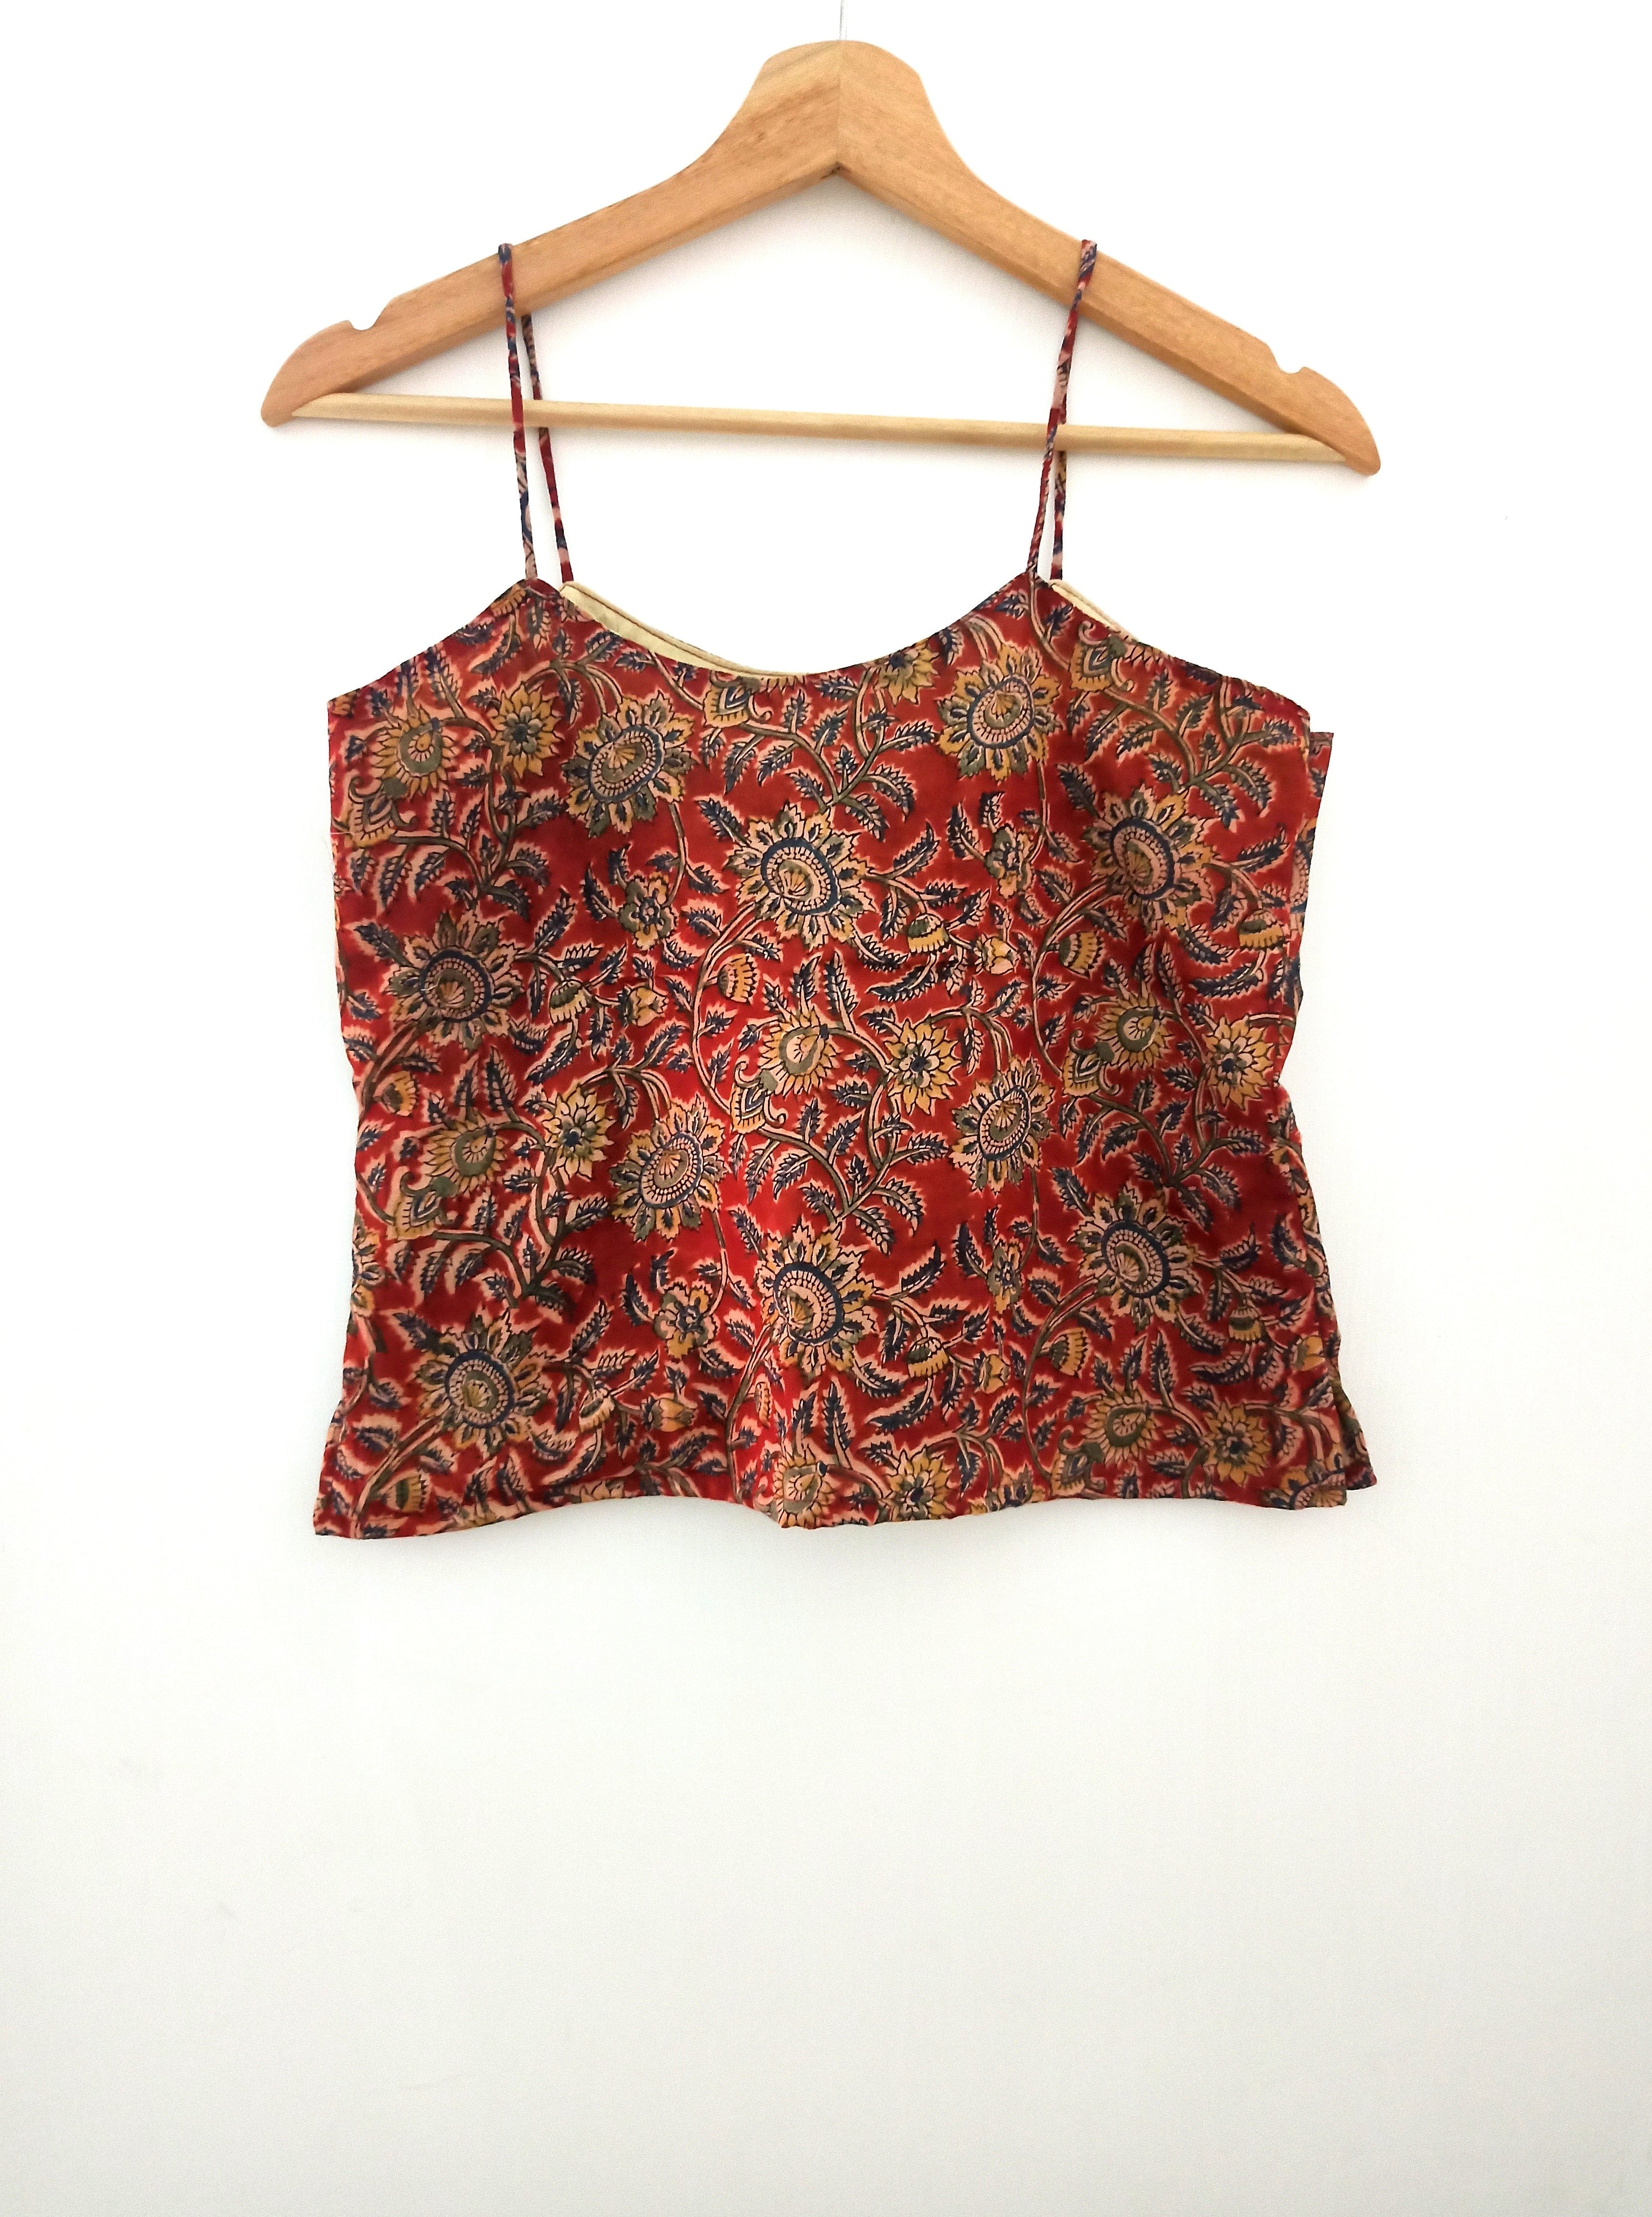 Marsala Crop Top (Size XS - 2L) - One piece available